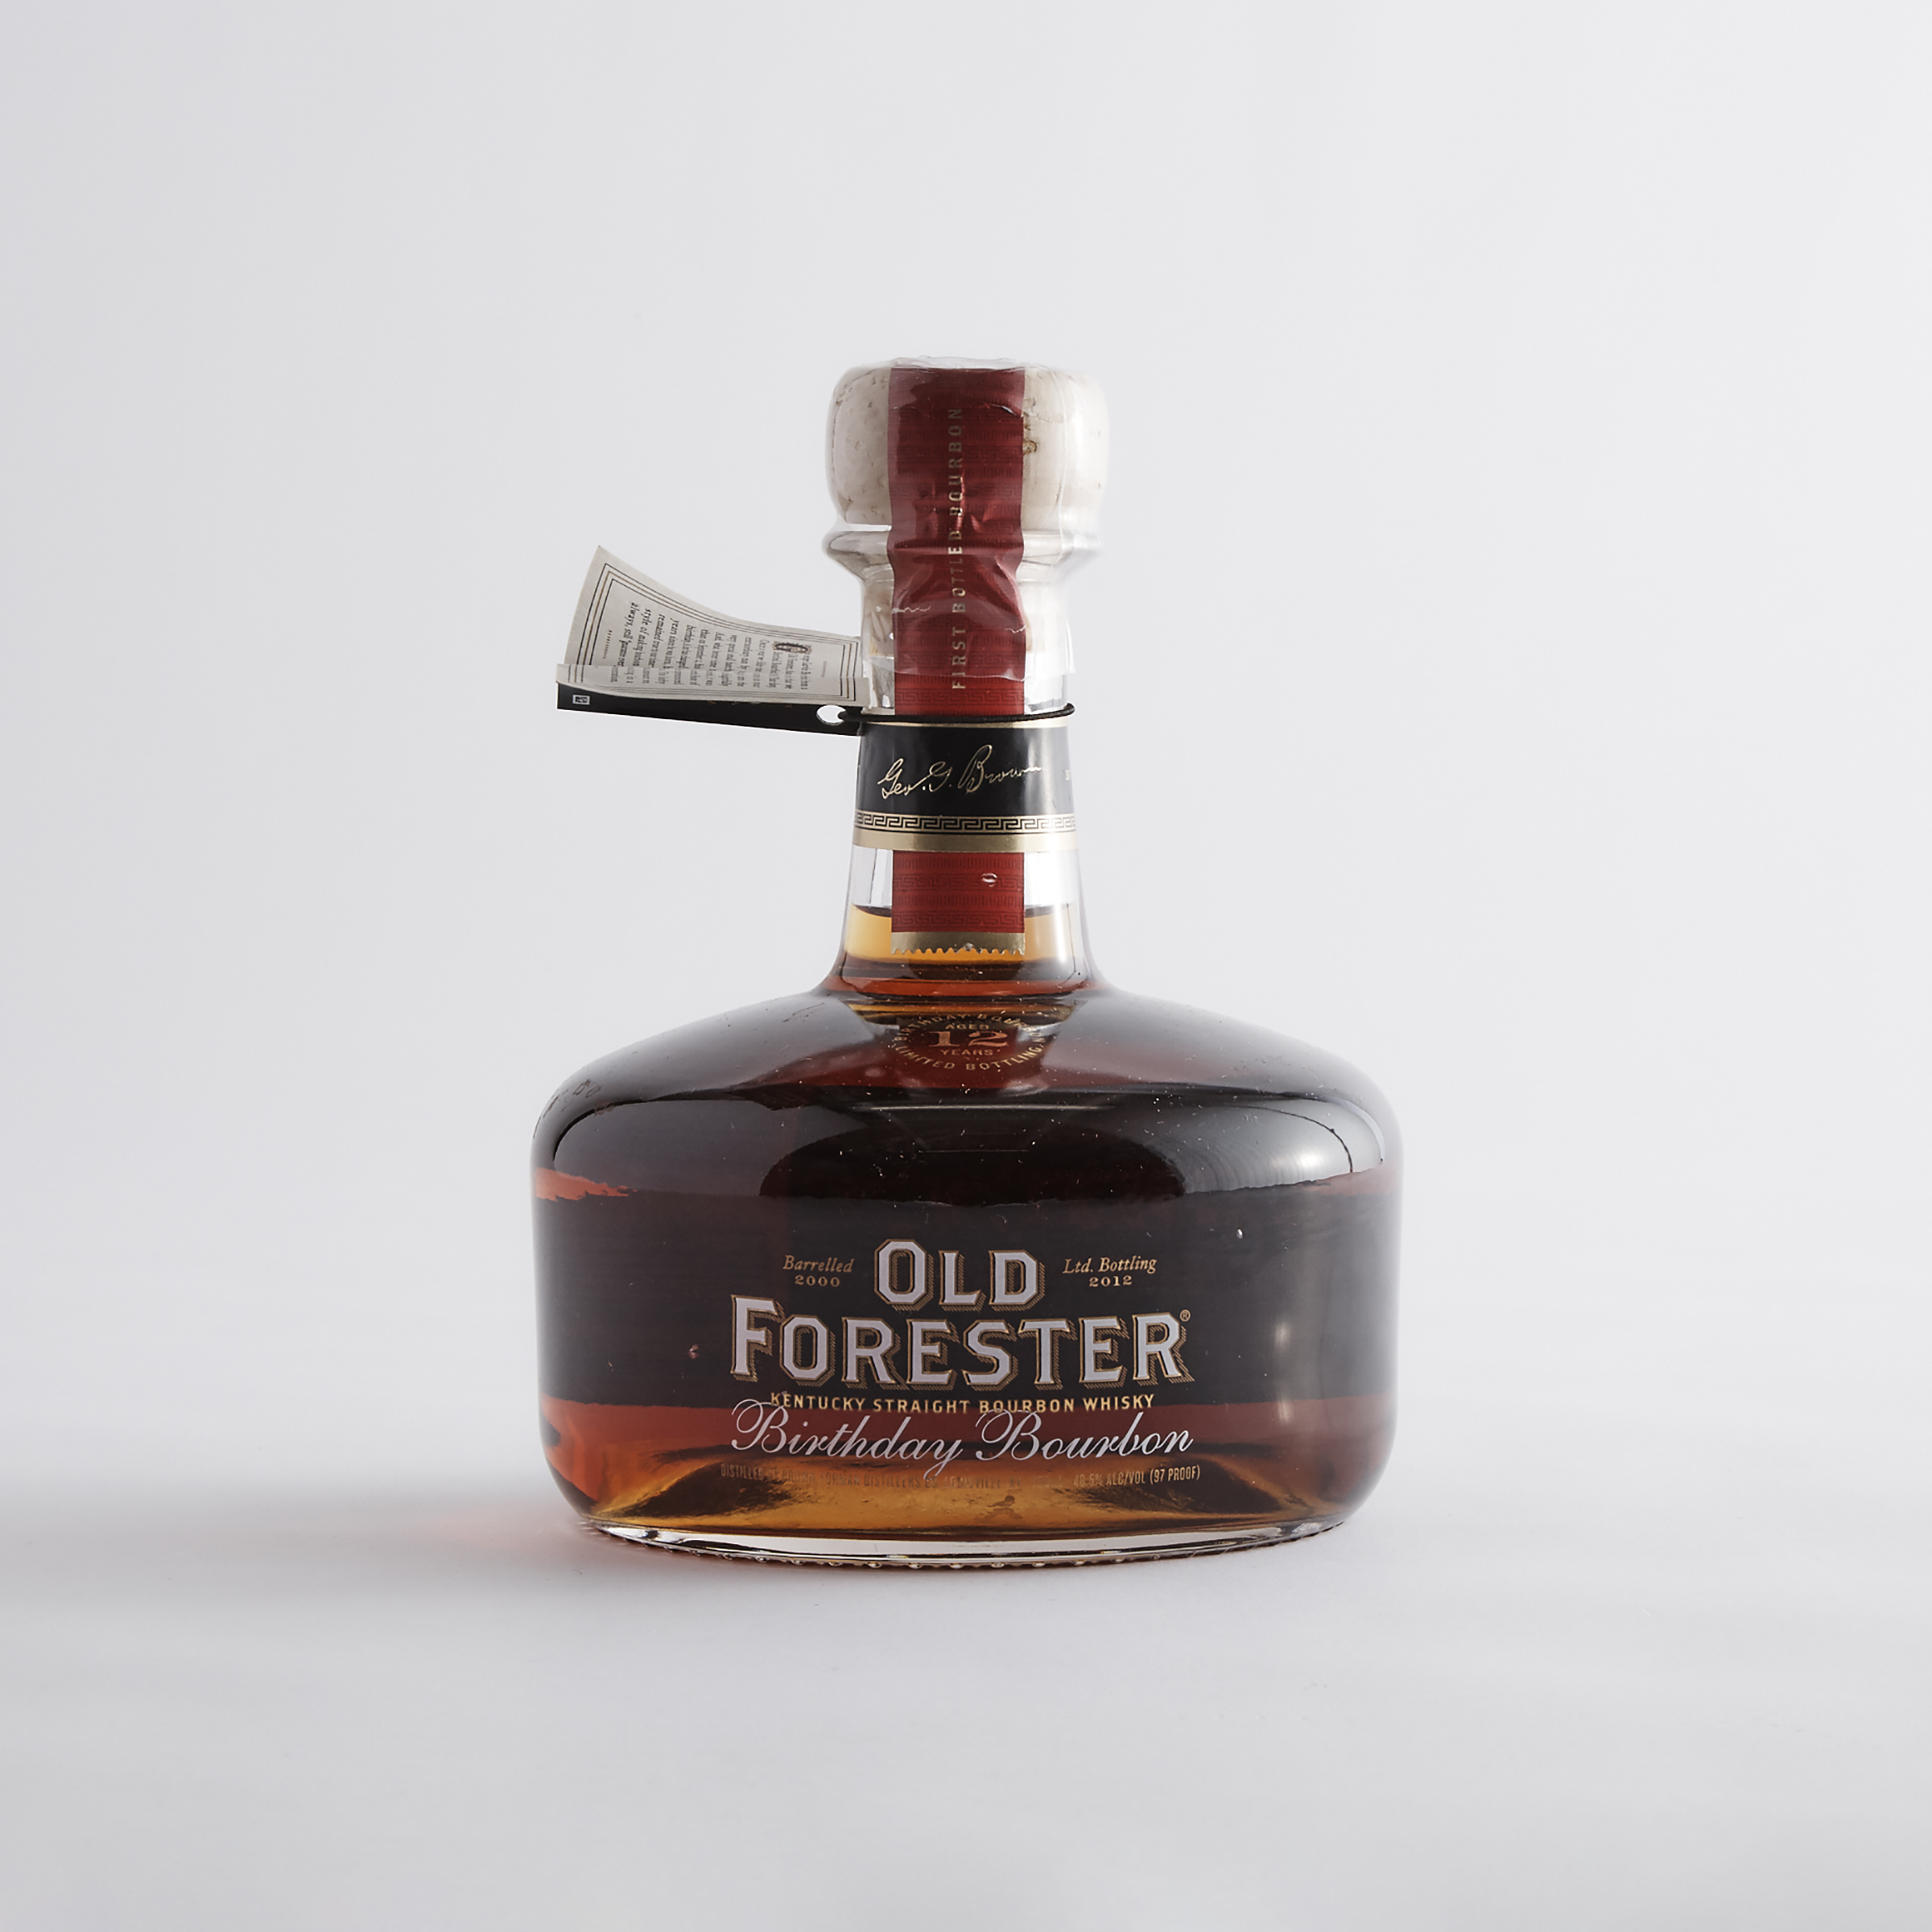 OLD FORESTER KENTUCKY STRAIGHT BOURBON WHISKY 12 YEARS (ONE 750 ML)